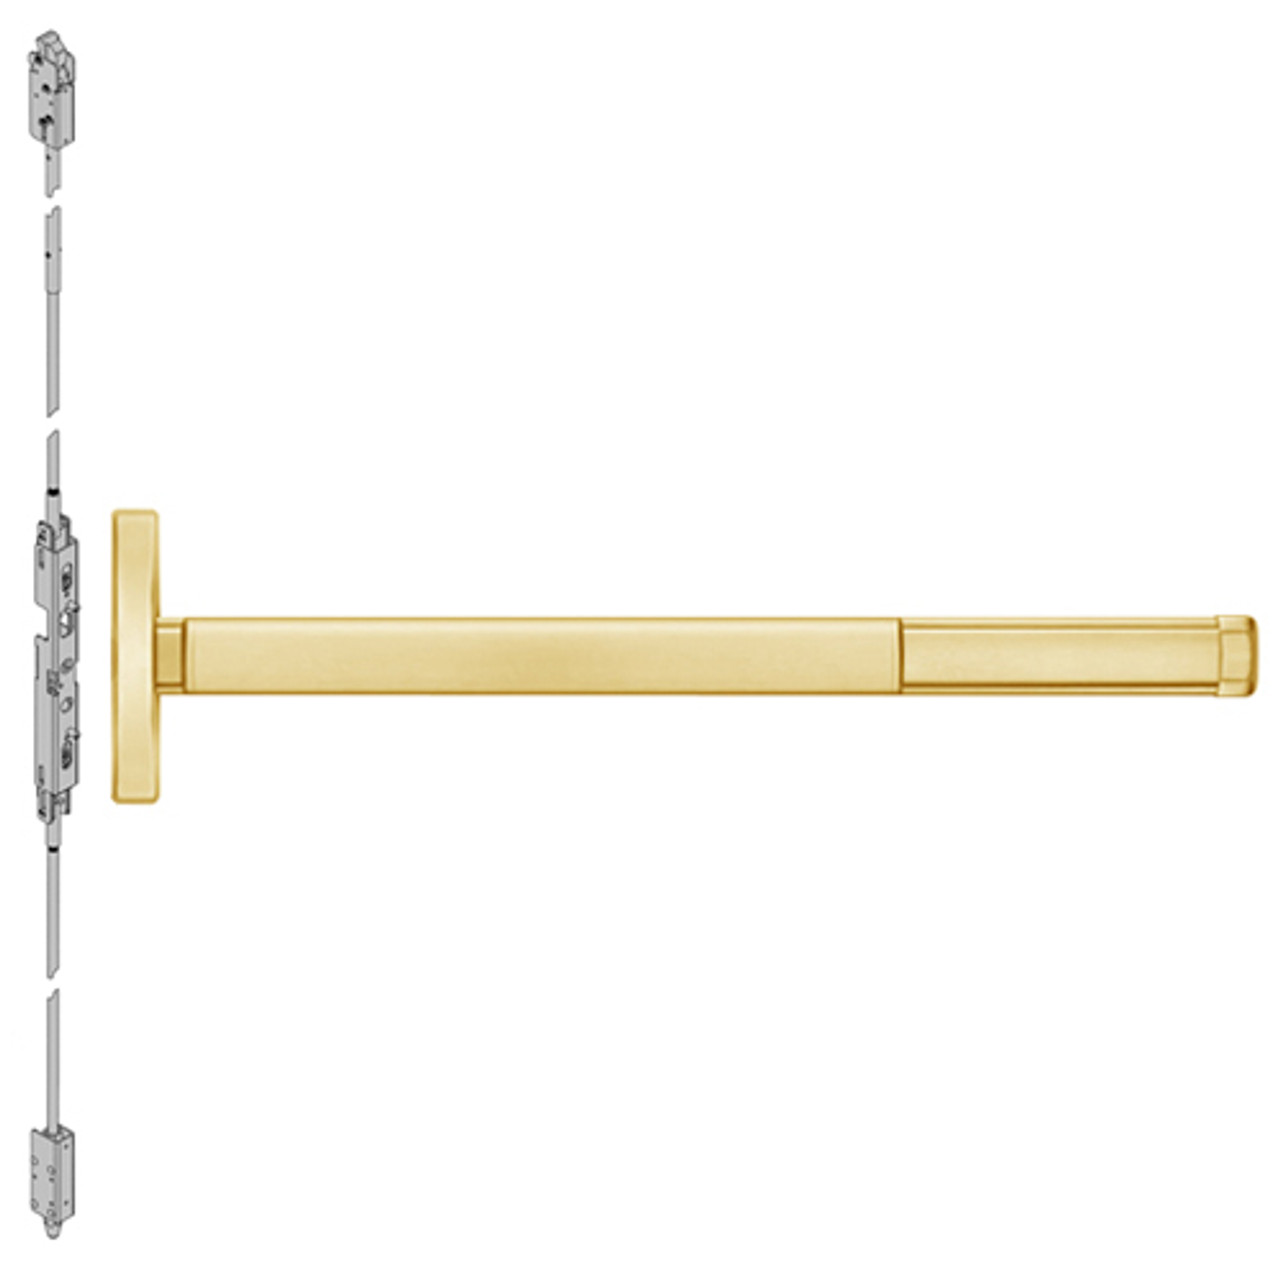 TSFL2601LBR-605-48 PHI 2600 Series Fire Rated Concealed Vertical Rod Exit Device with Touchbar Monitoring Switch Prepped for Cover Plate in Bright Brass Finish